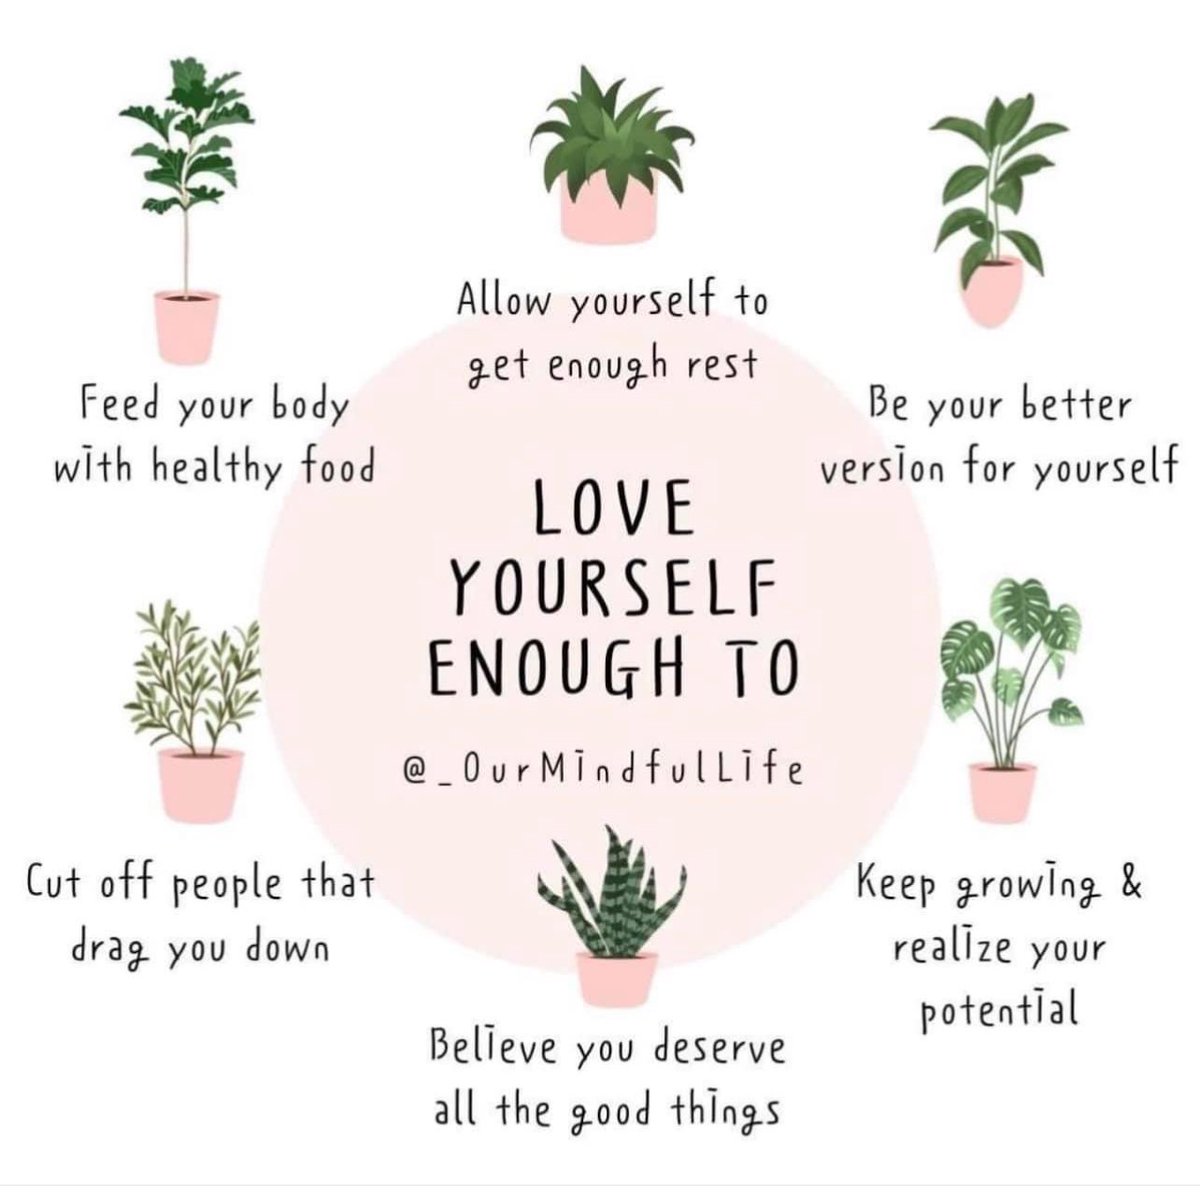 When we are kind to ourselves instead of punishing with self destructive behaviour. We allow ourselves to flourish. As it is often said if plants do well with words of nurturing imagine the effects on humans! Be kind to you #mentalhealth